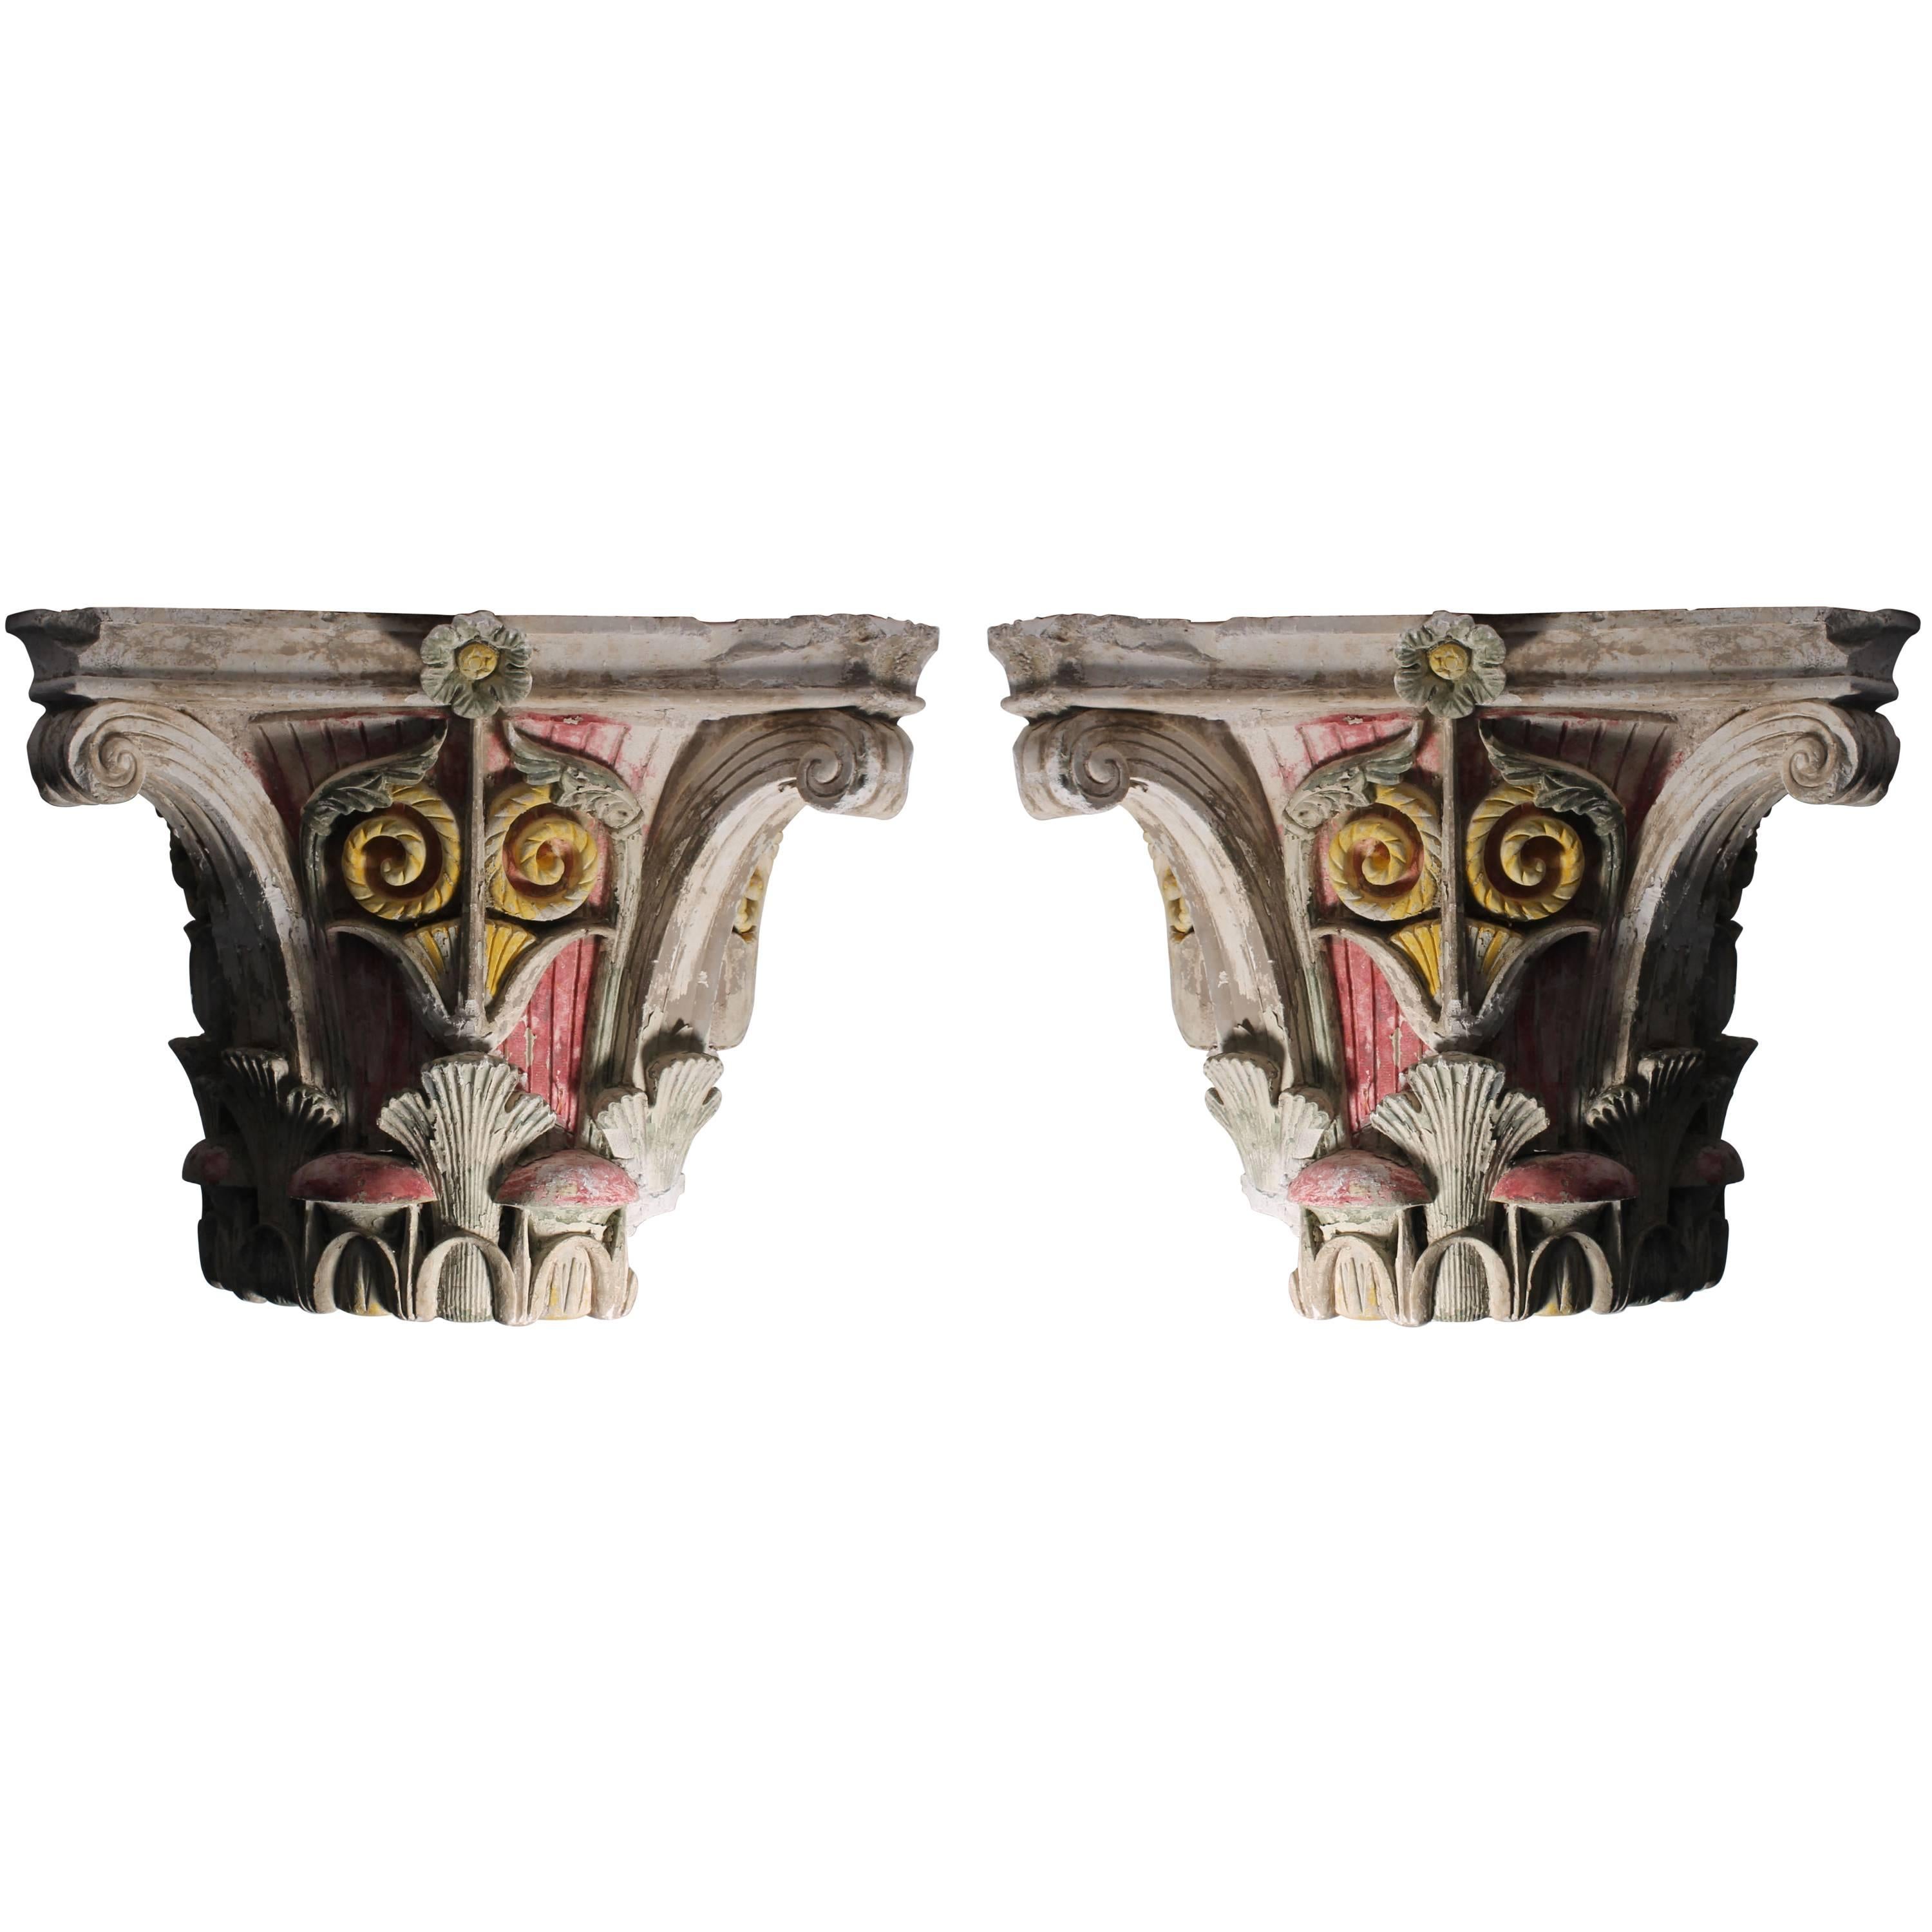 Pair of Early Large Architectural Corinthian Capitals in Plaster